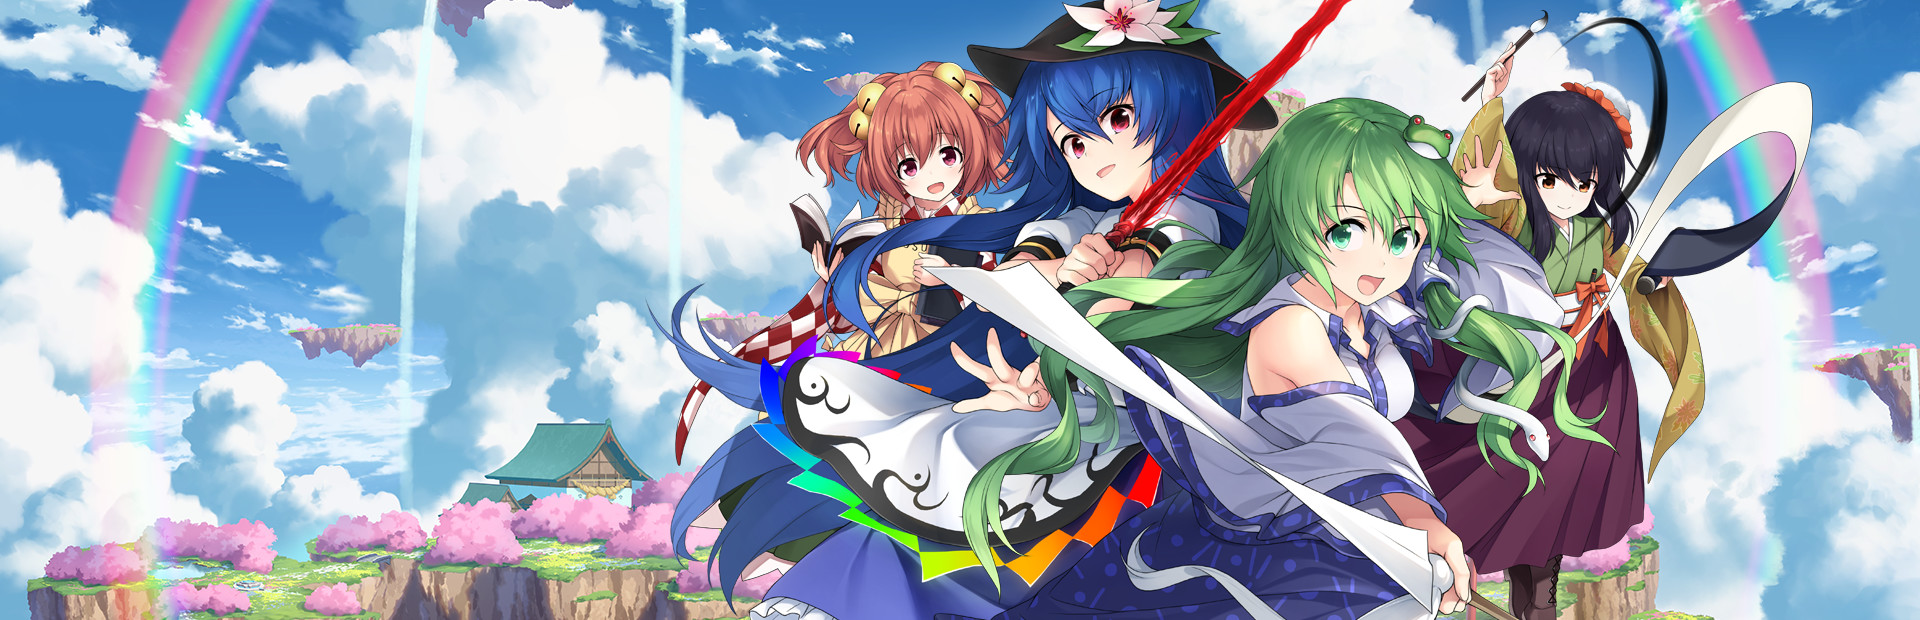 Touhou Genso Wanderer -Lotus Labyrinth R- cover image